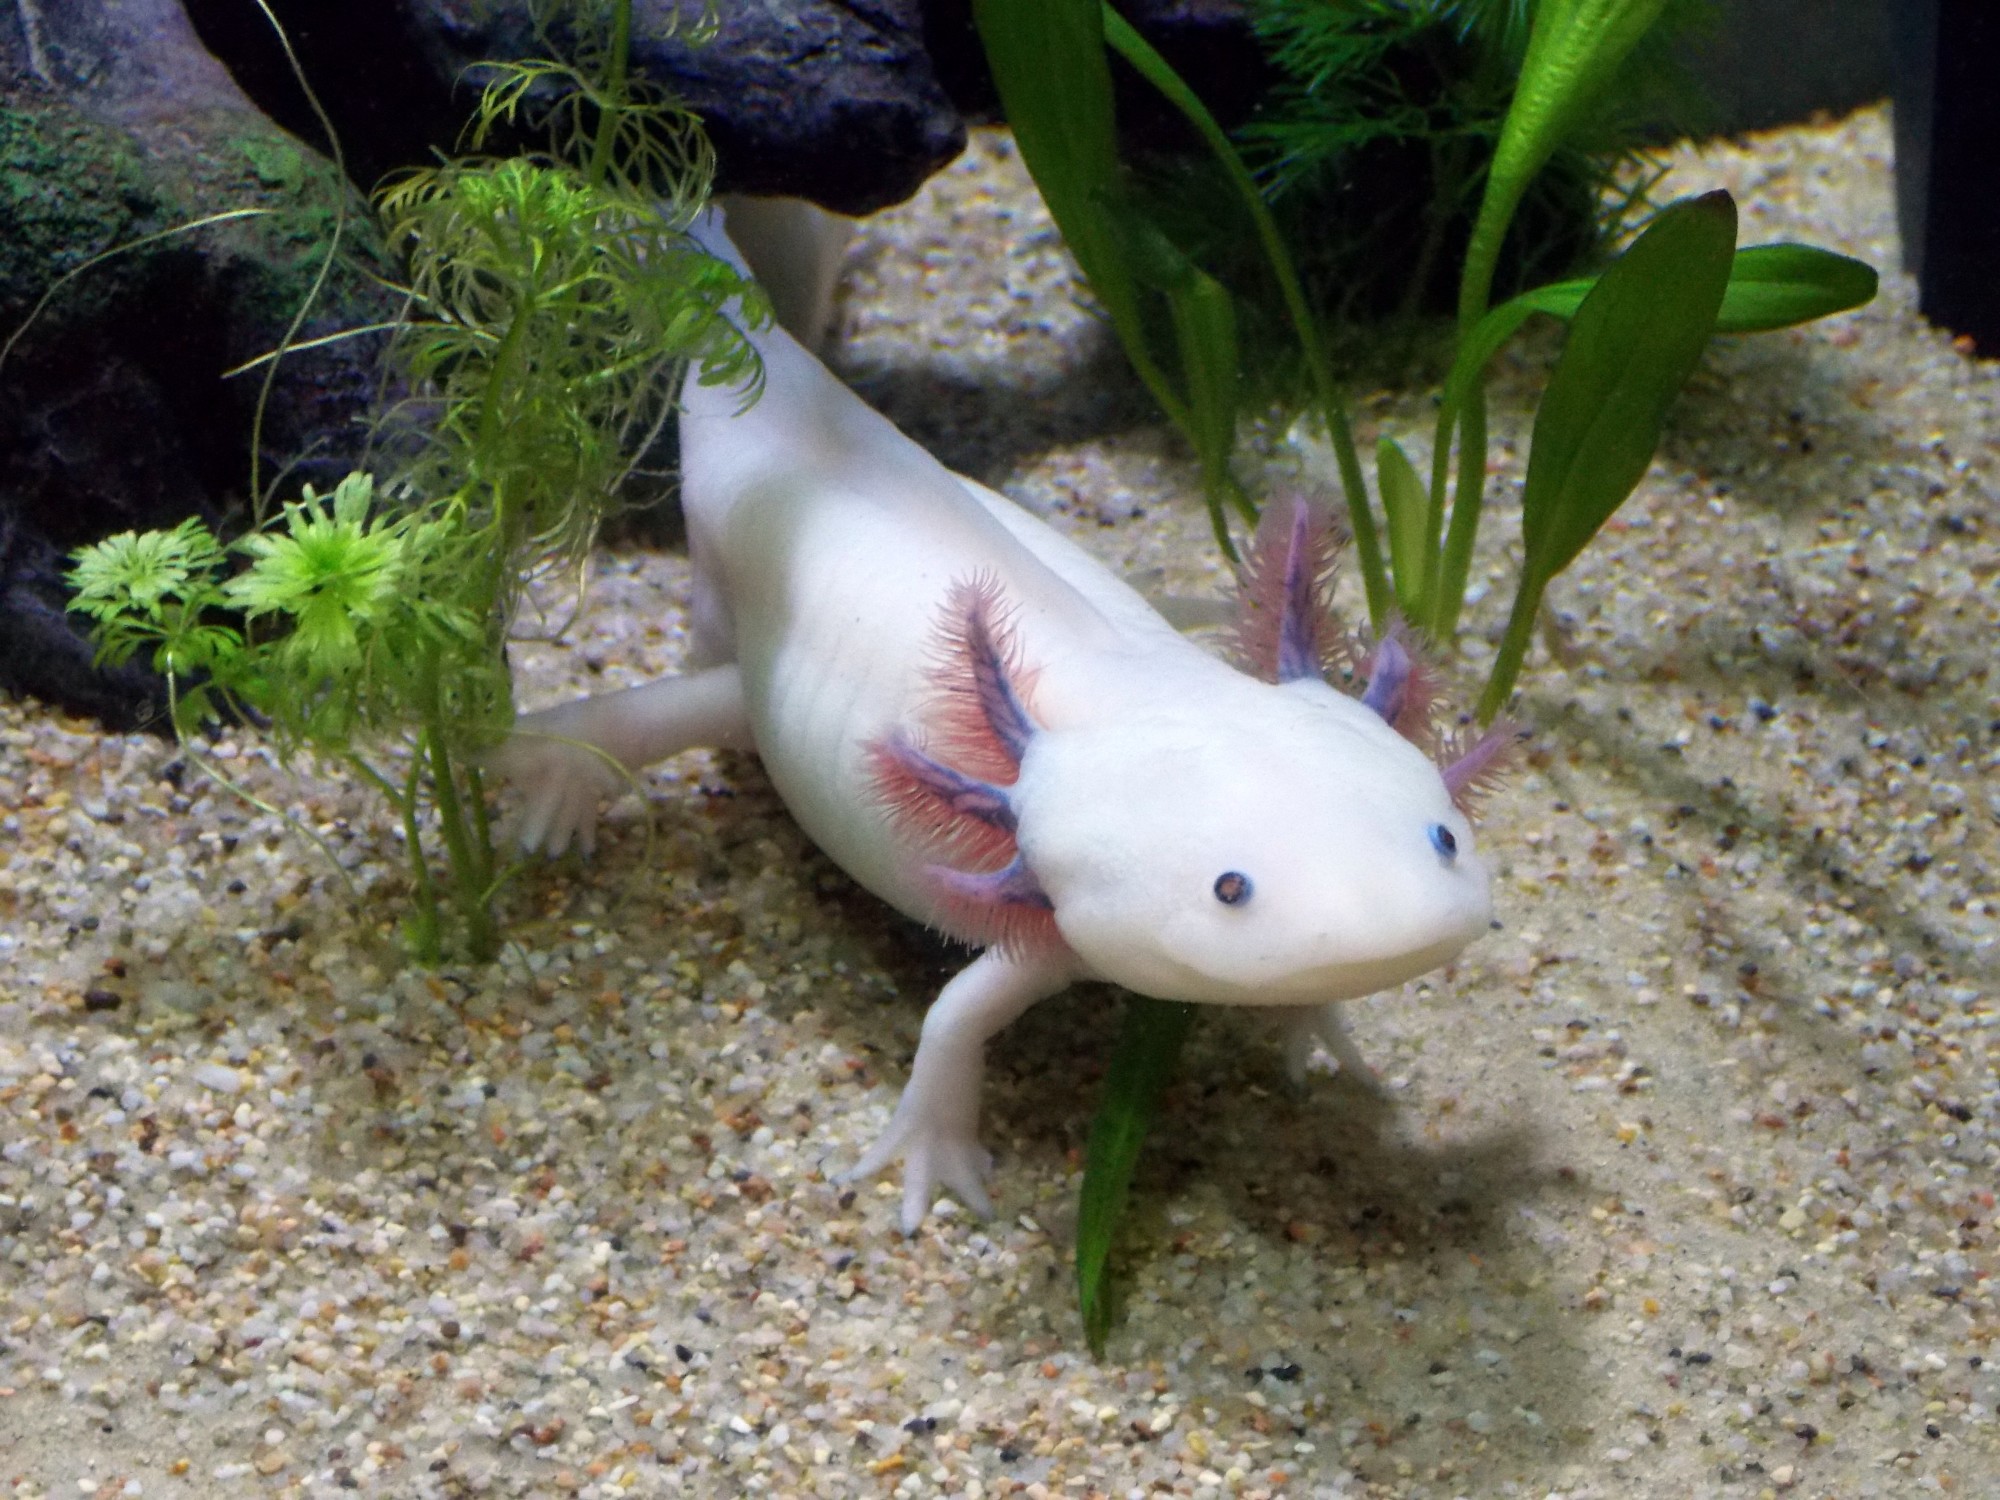 There are several reasons why you should get an axolotl as a pet. Learn how to take care of an axolotl by checking out this guide.